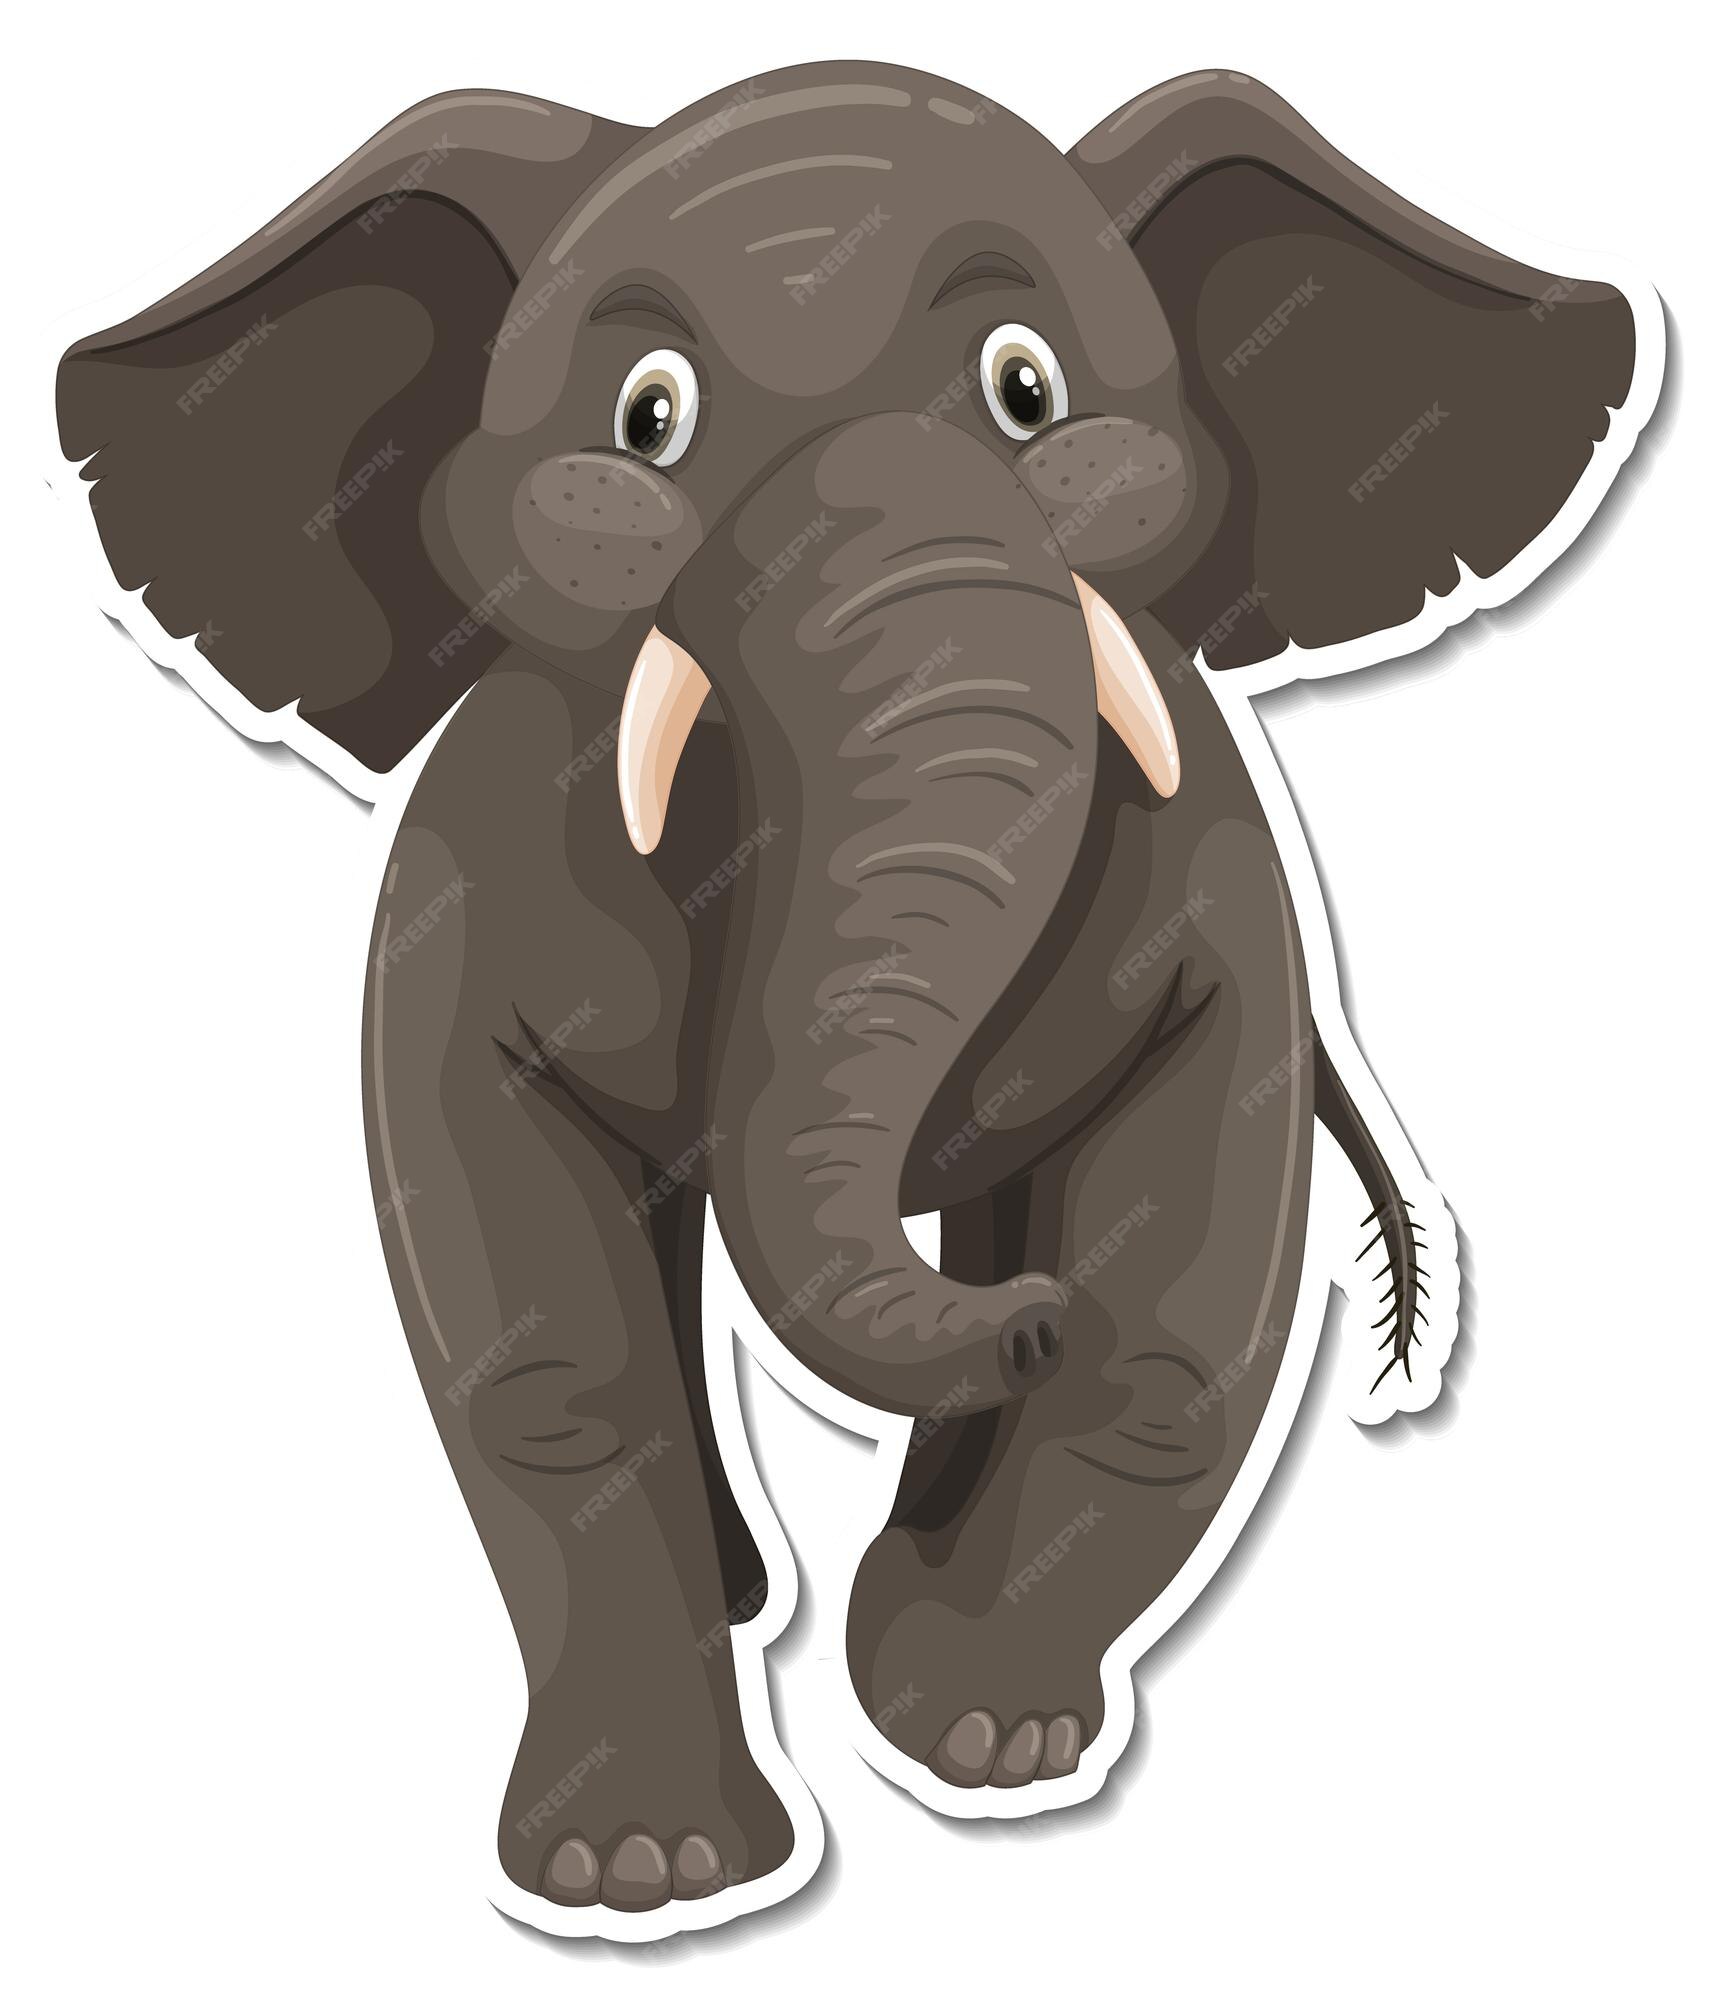 Free Vector | A sticker template of elephant cartoon character